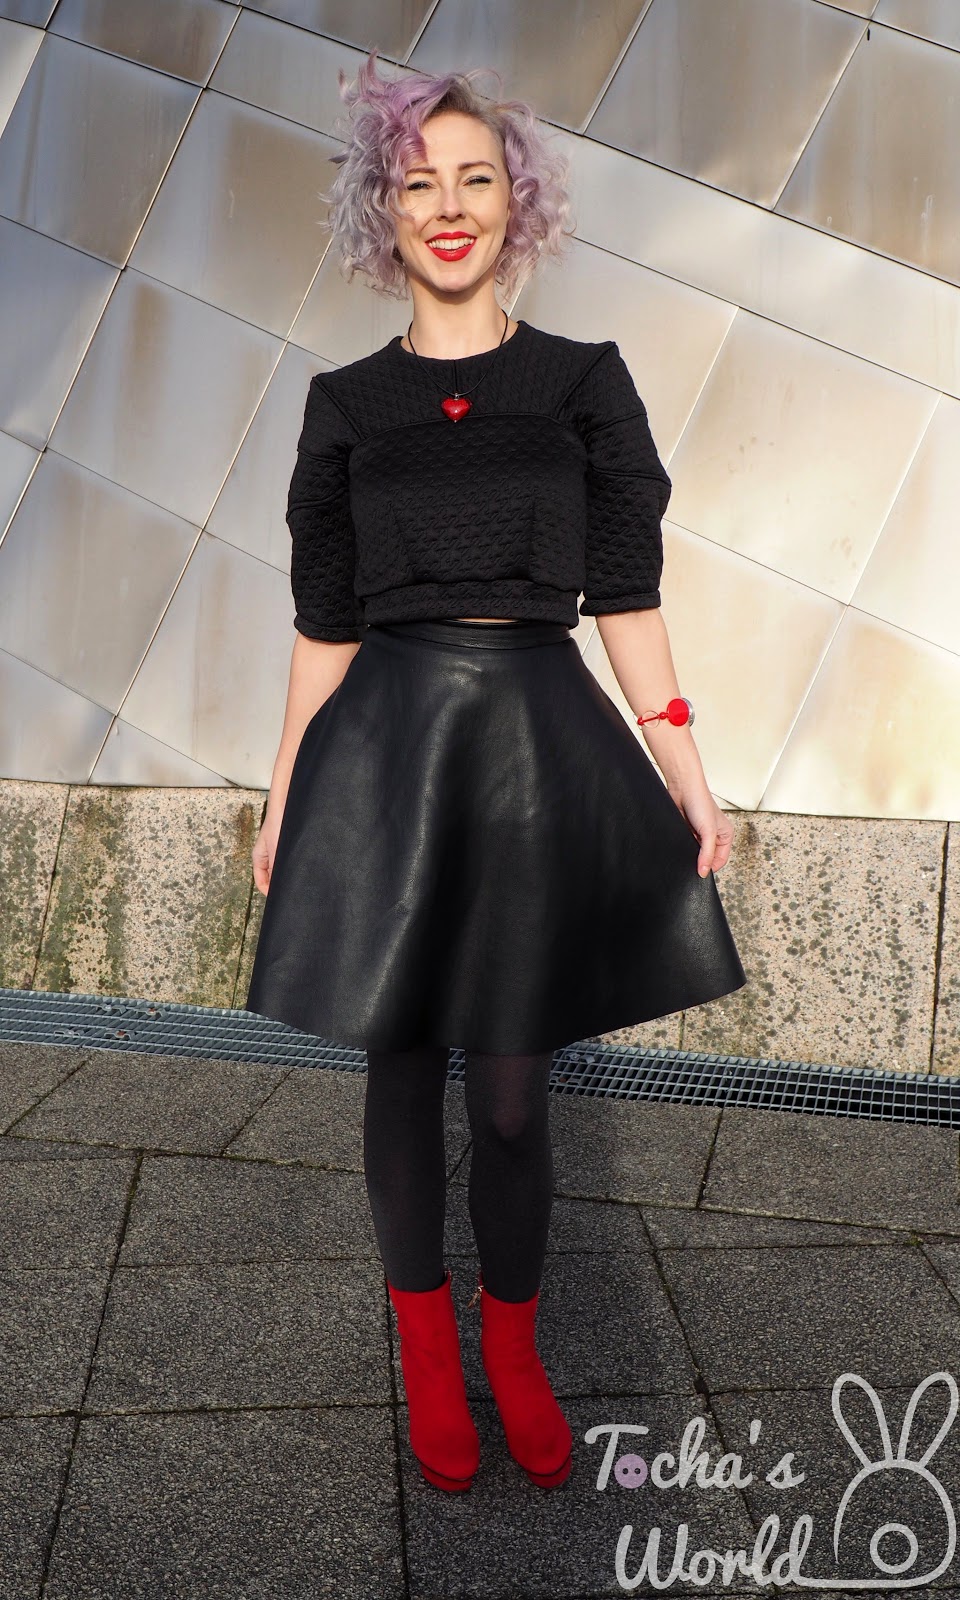 Armadillo, Black Milk bummers, Calzedonia, Clyde Auditorium, crop top, Descience, Glasgow Clyde College, Glasgow Science Centre, hot pants, houndstooth, Raglan sleeve, Remnant Kings, scuba, semi-circle skirt, yoke, 